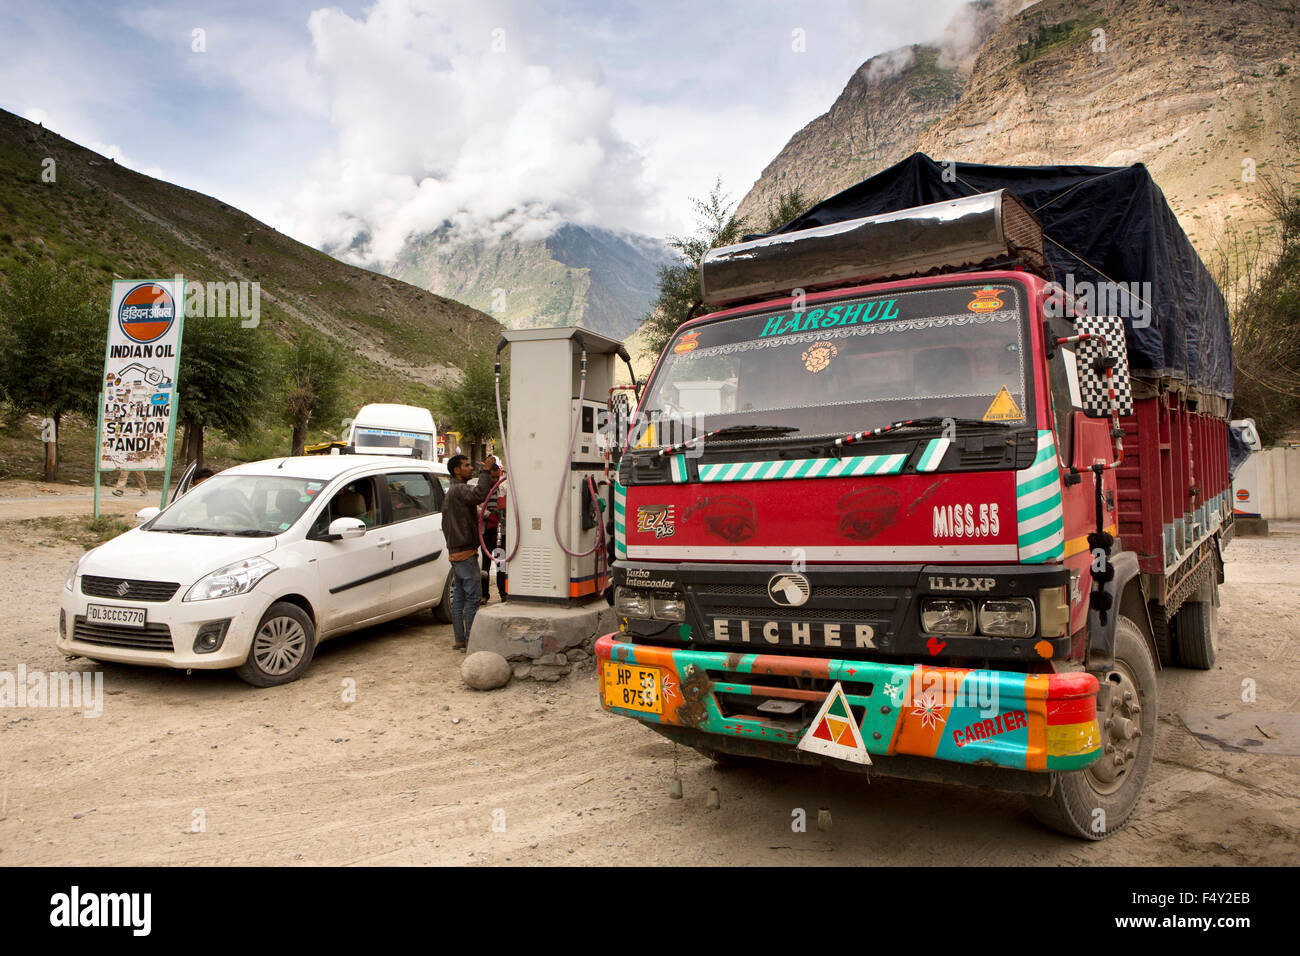 India, Himachal Pradesh, Lahaul and Spiti, Tandi, trucks and cars at last Indian Oil filling station for 365km Stock Photo